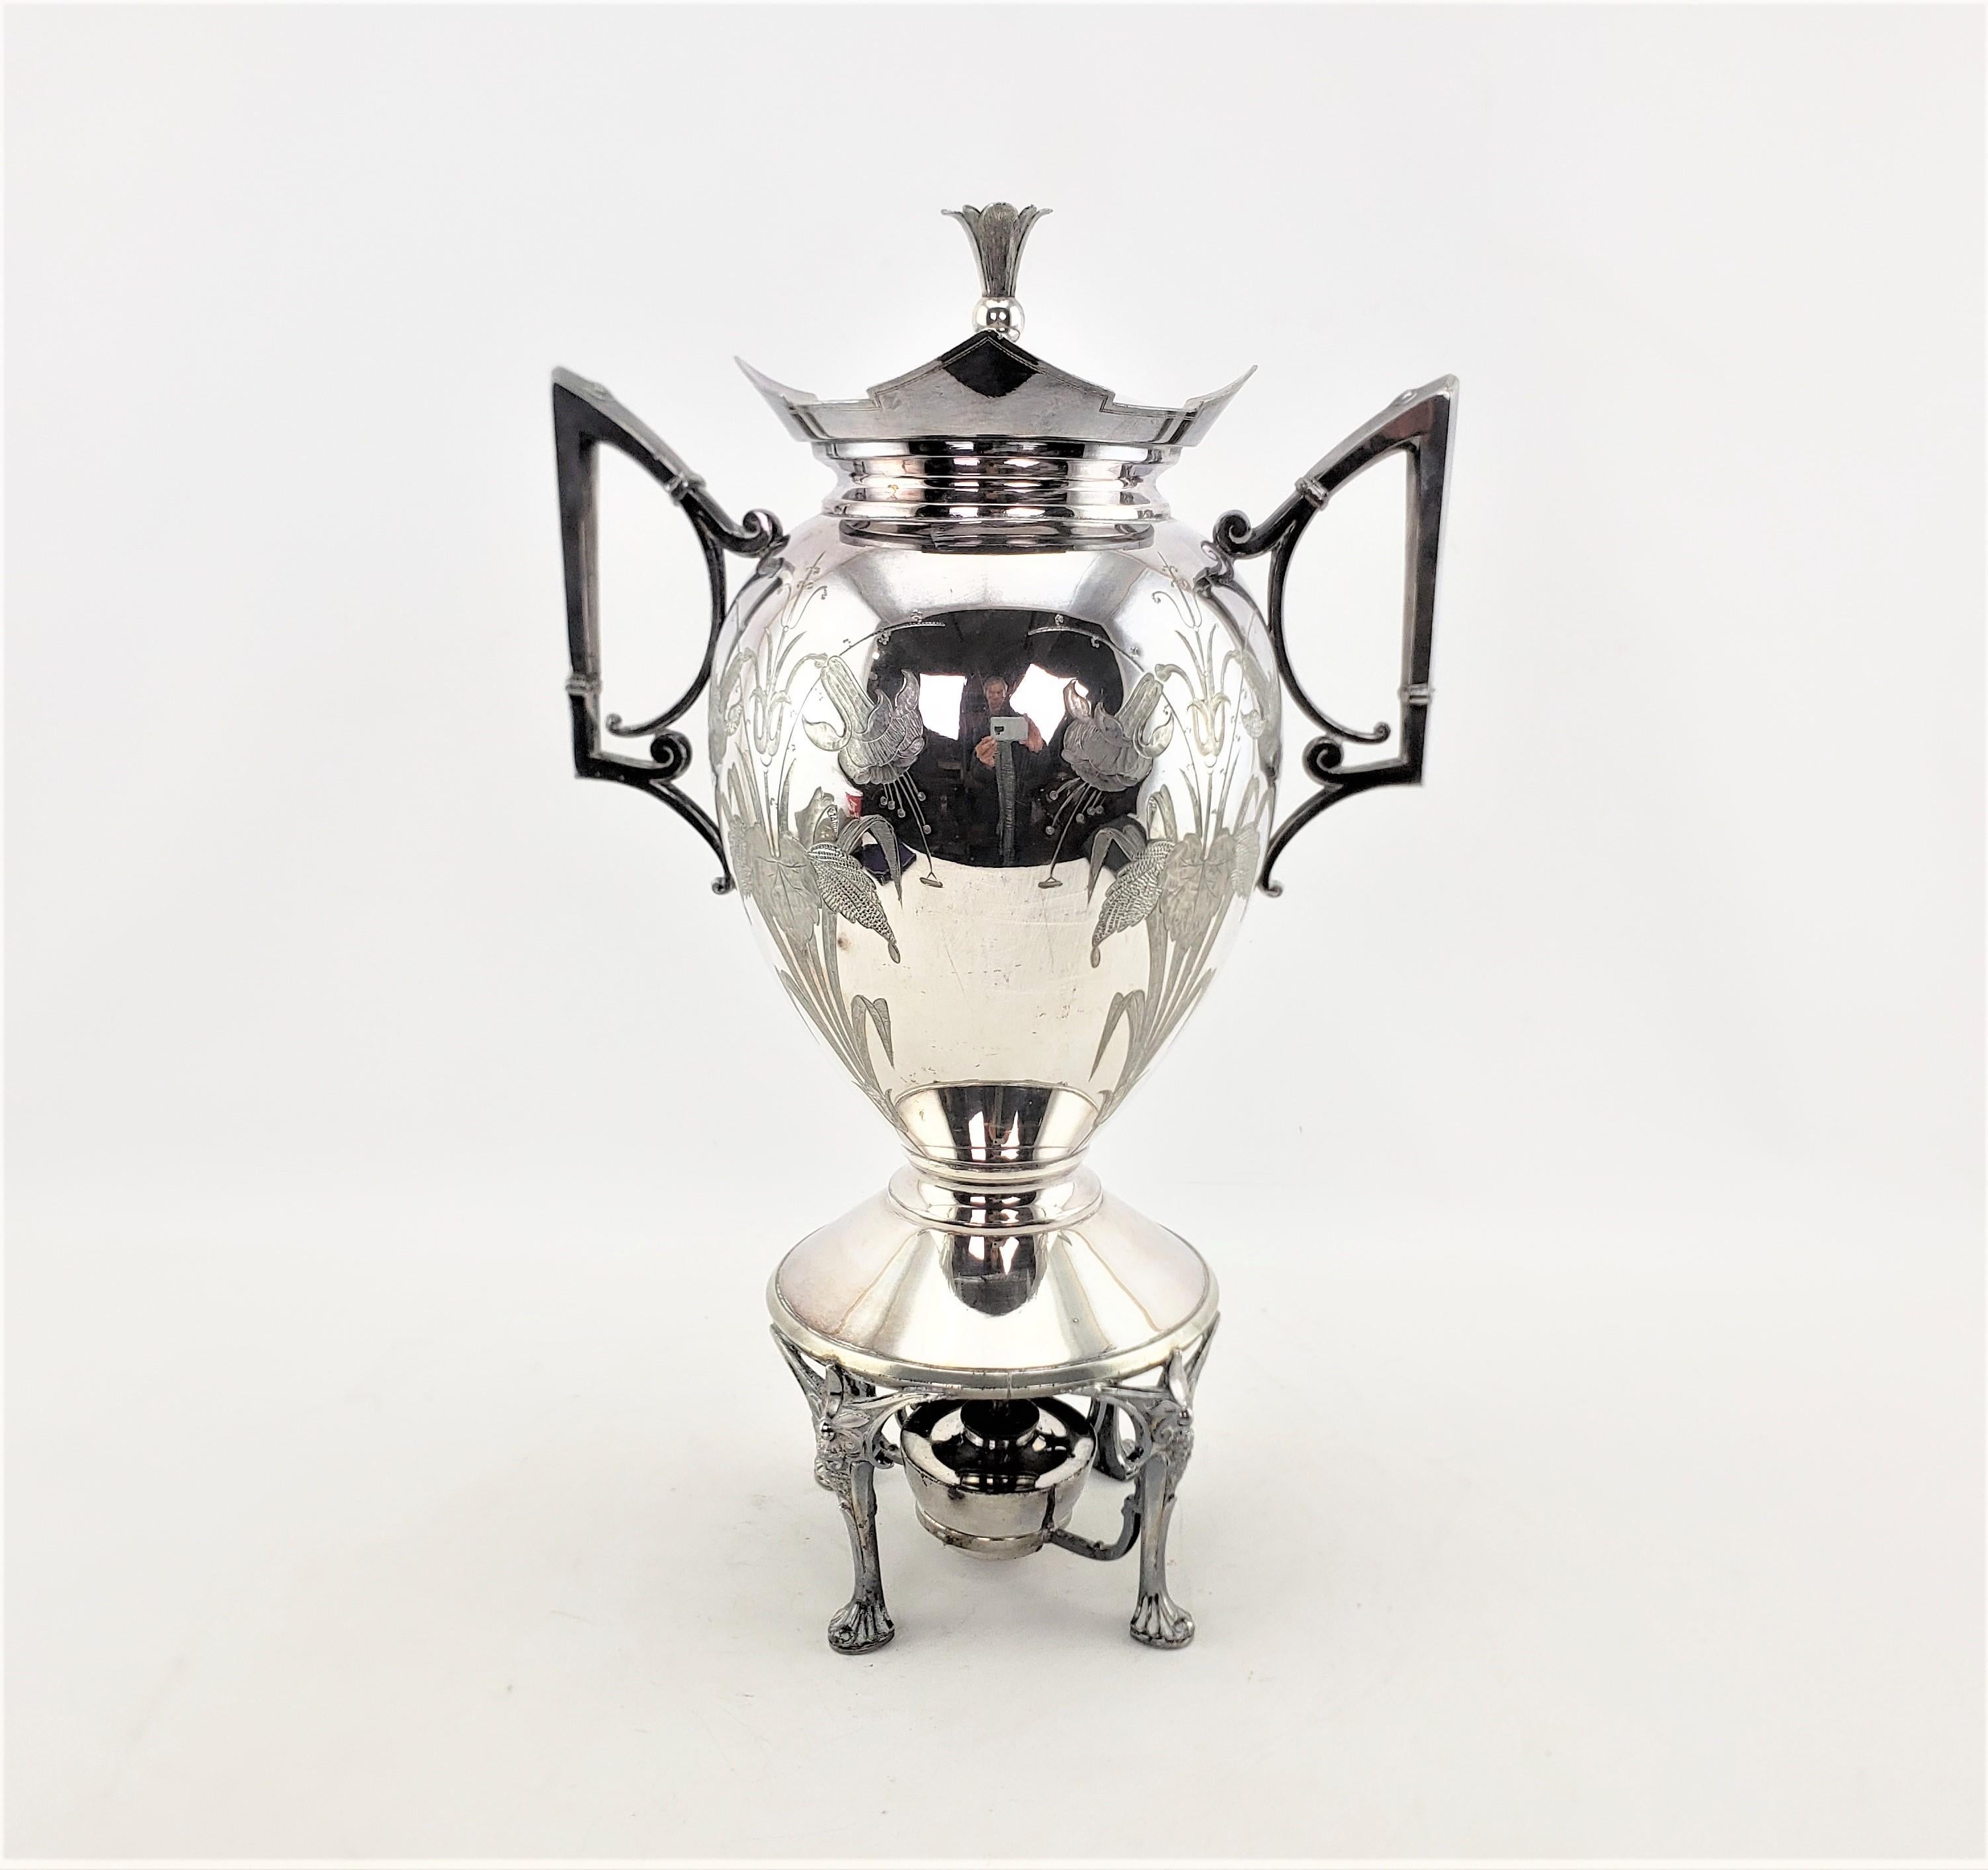 Antique Aesthetic Movement Silver Plated Hot Water Kettle with Floral Decoration In Good Condition For Sale In Hamilton, Ontario